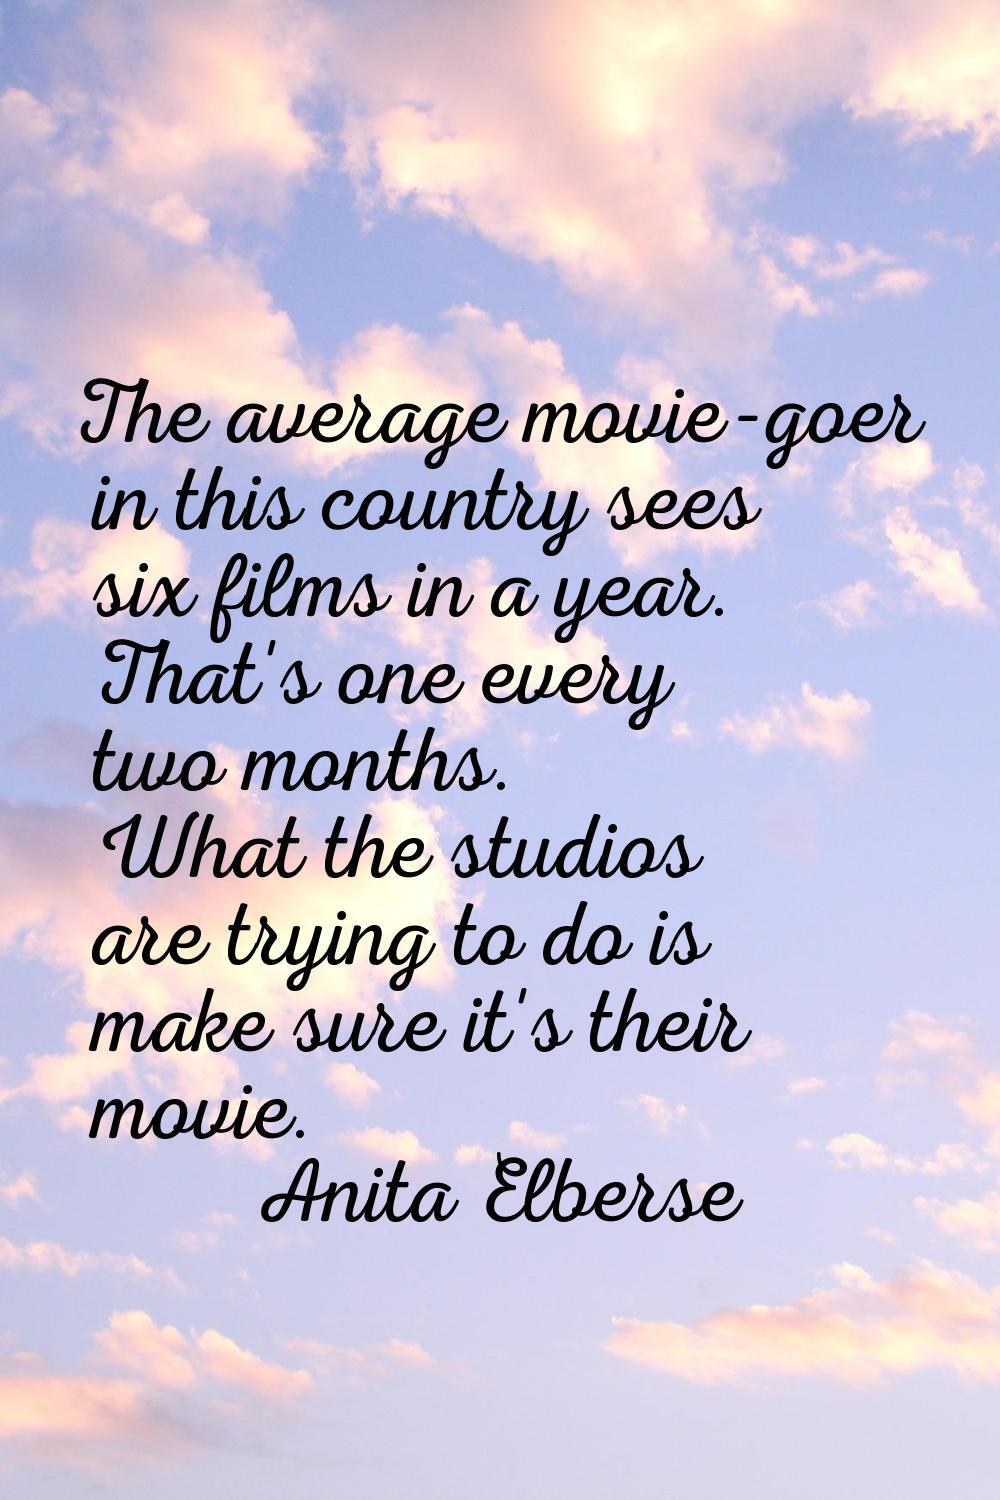 The average movie-goer in this country sees six films in a year. That's one every two months. What 